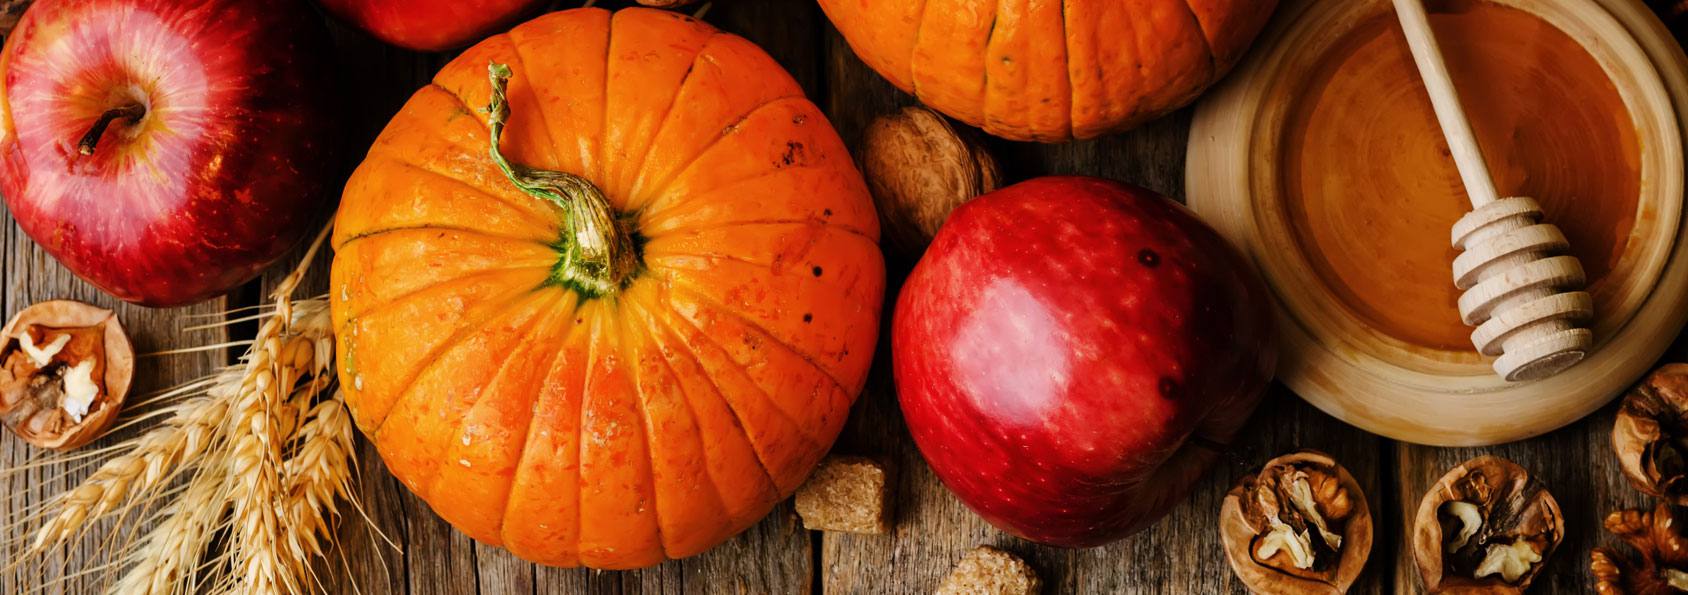 Pumpkins and other food to eat during Halloween